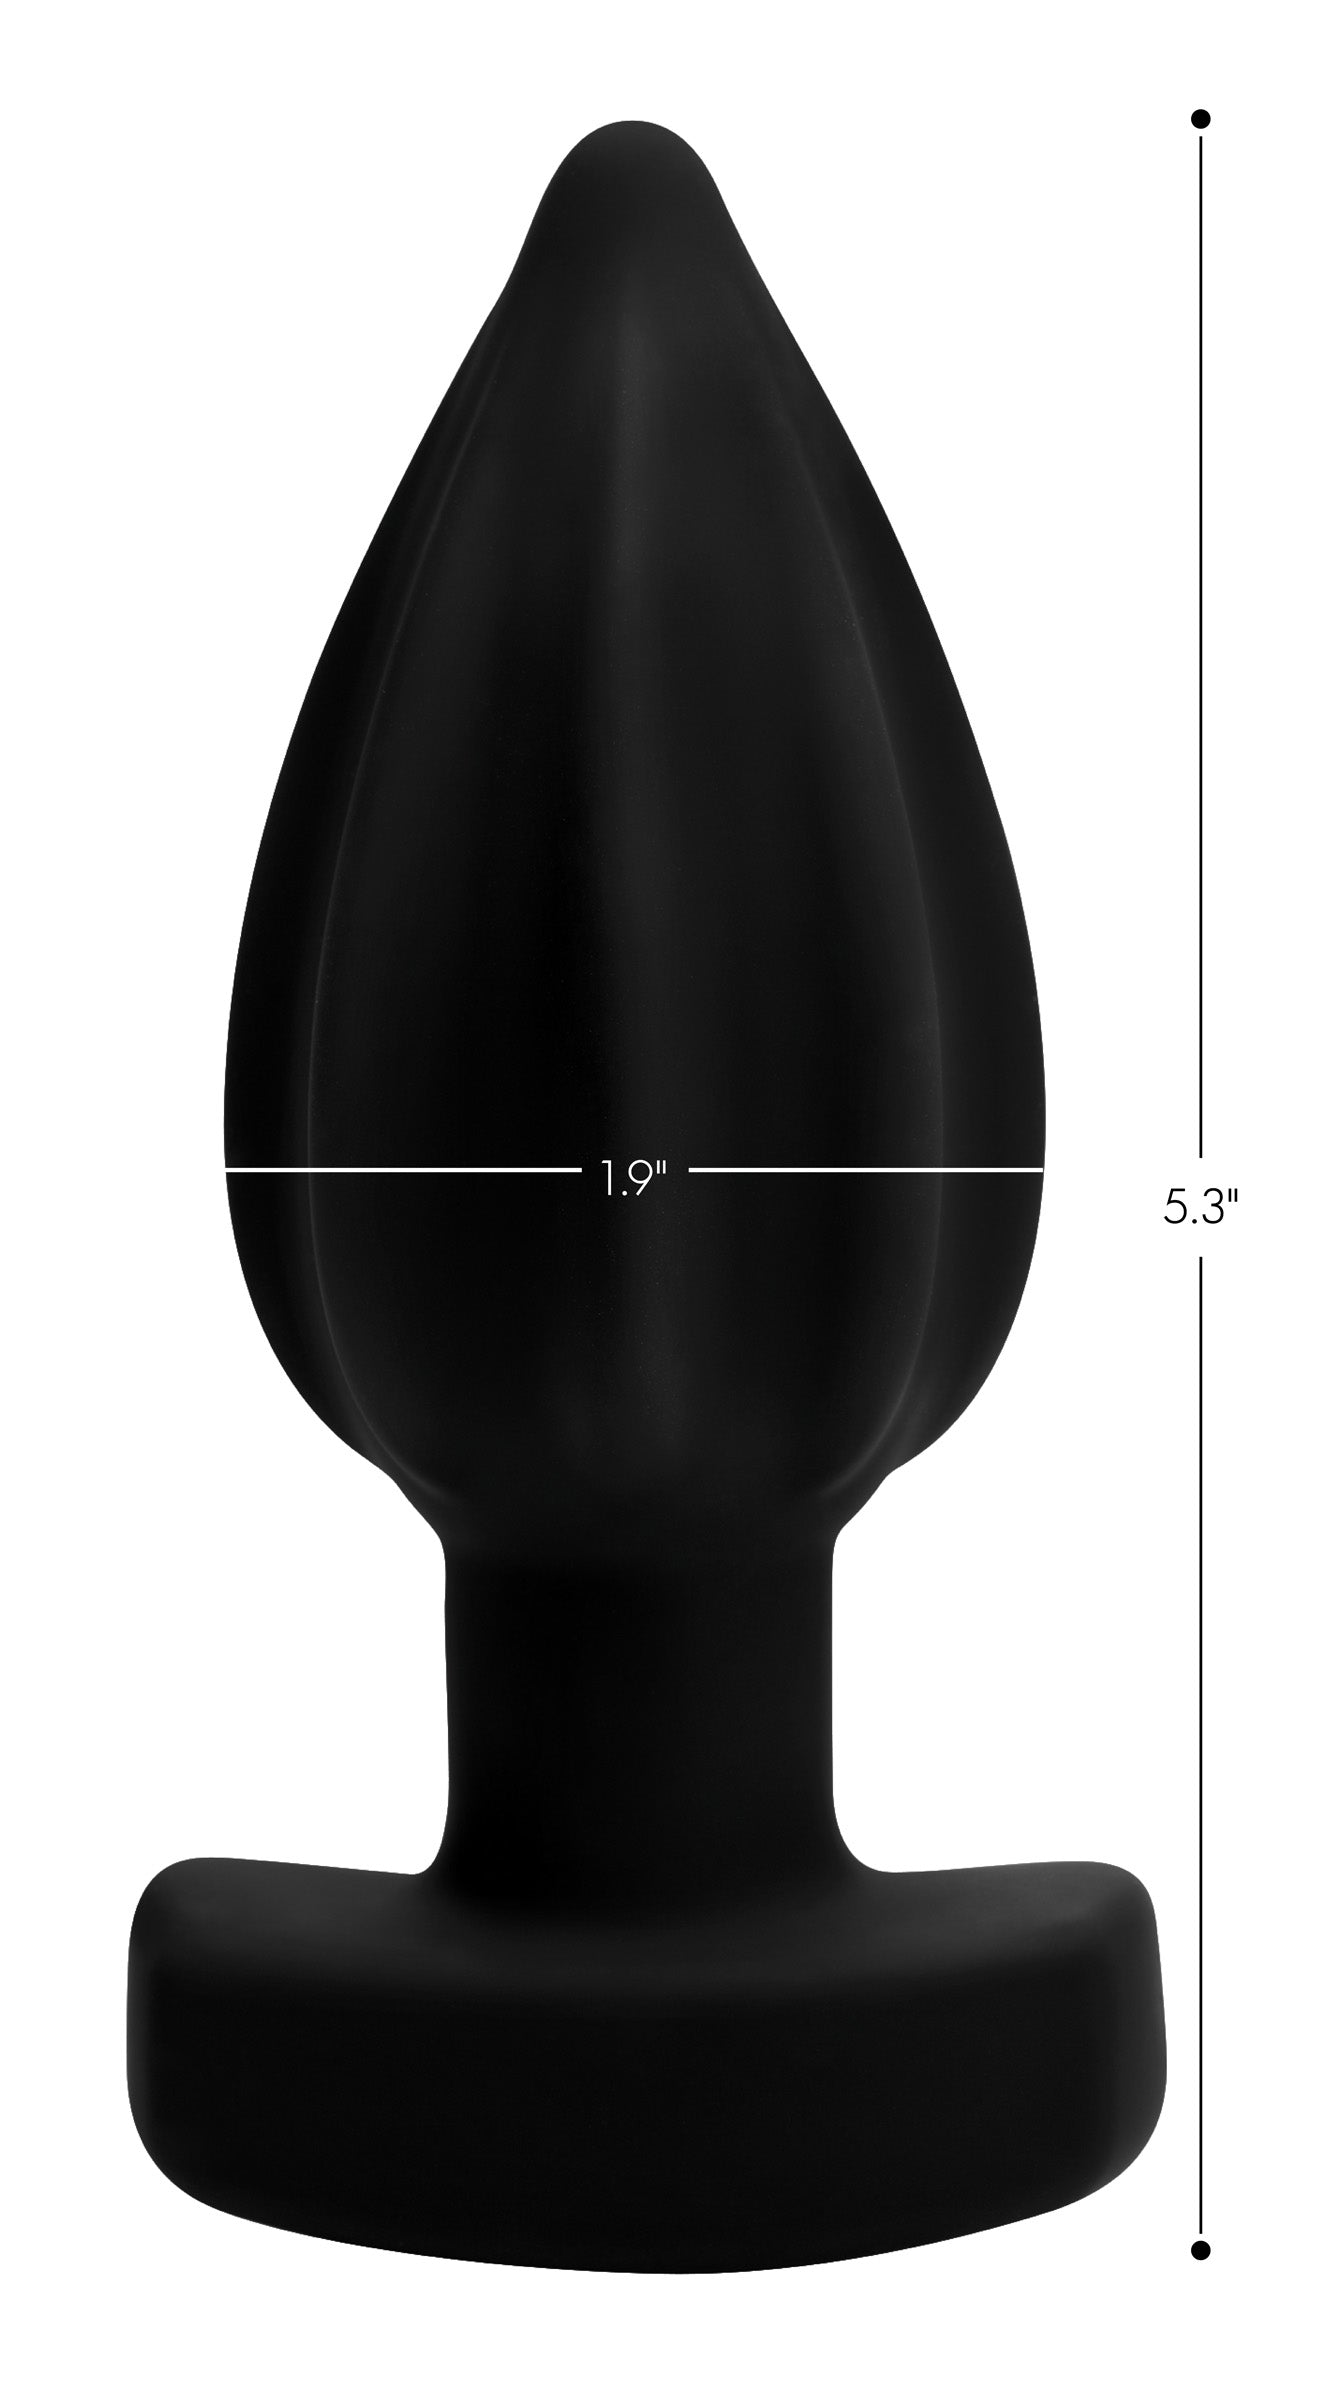 The Assterisk 10x Ribbed Silicone Remote Control Vibrating Butt Plug